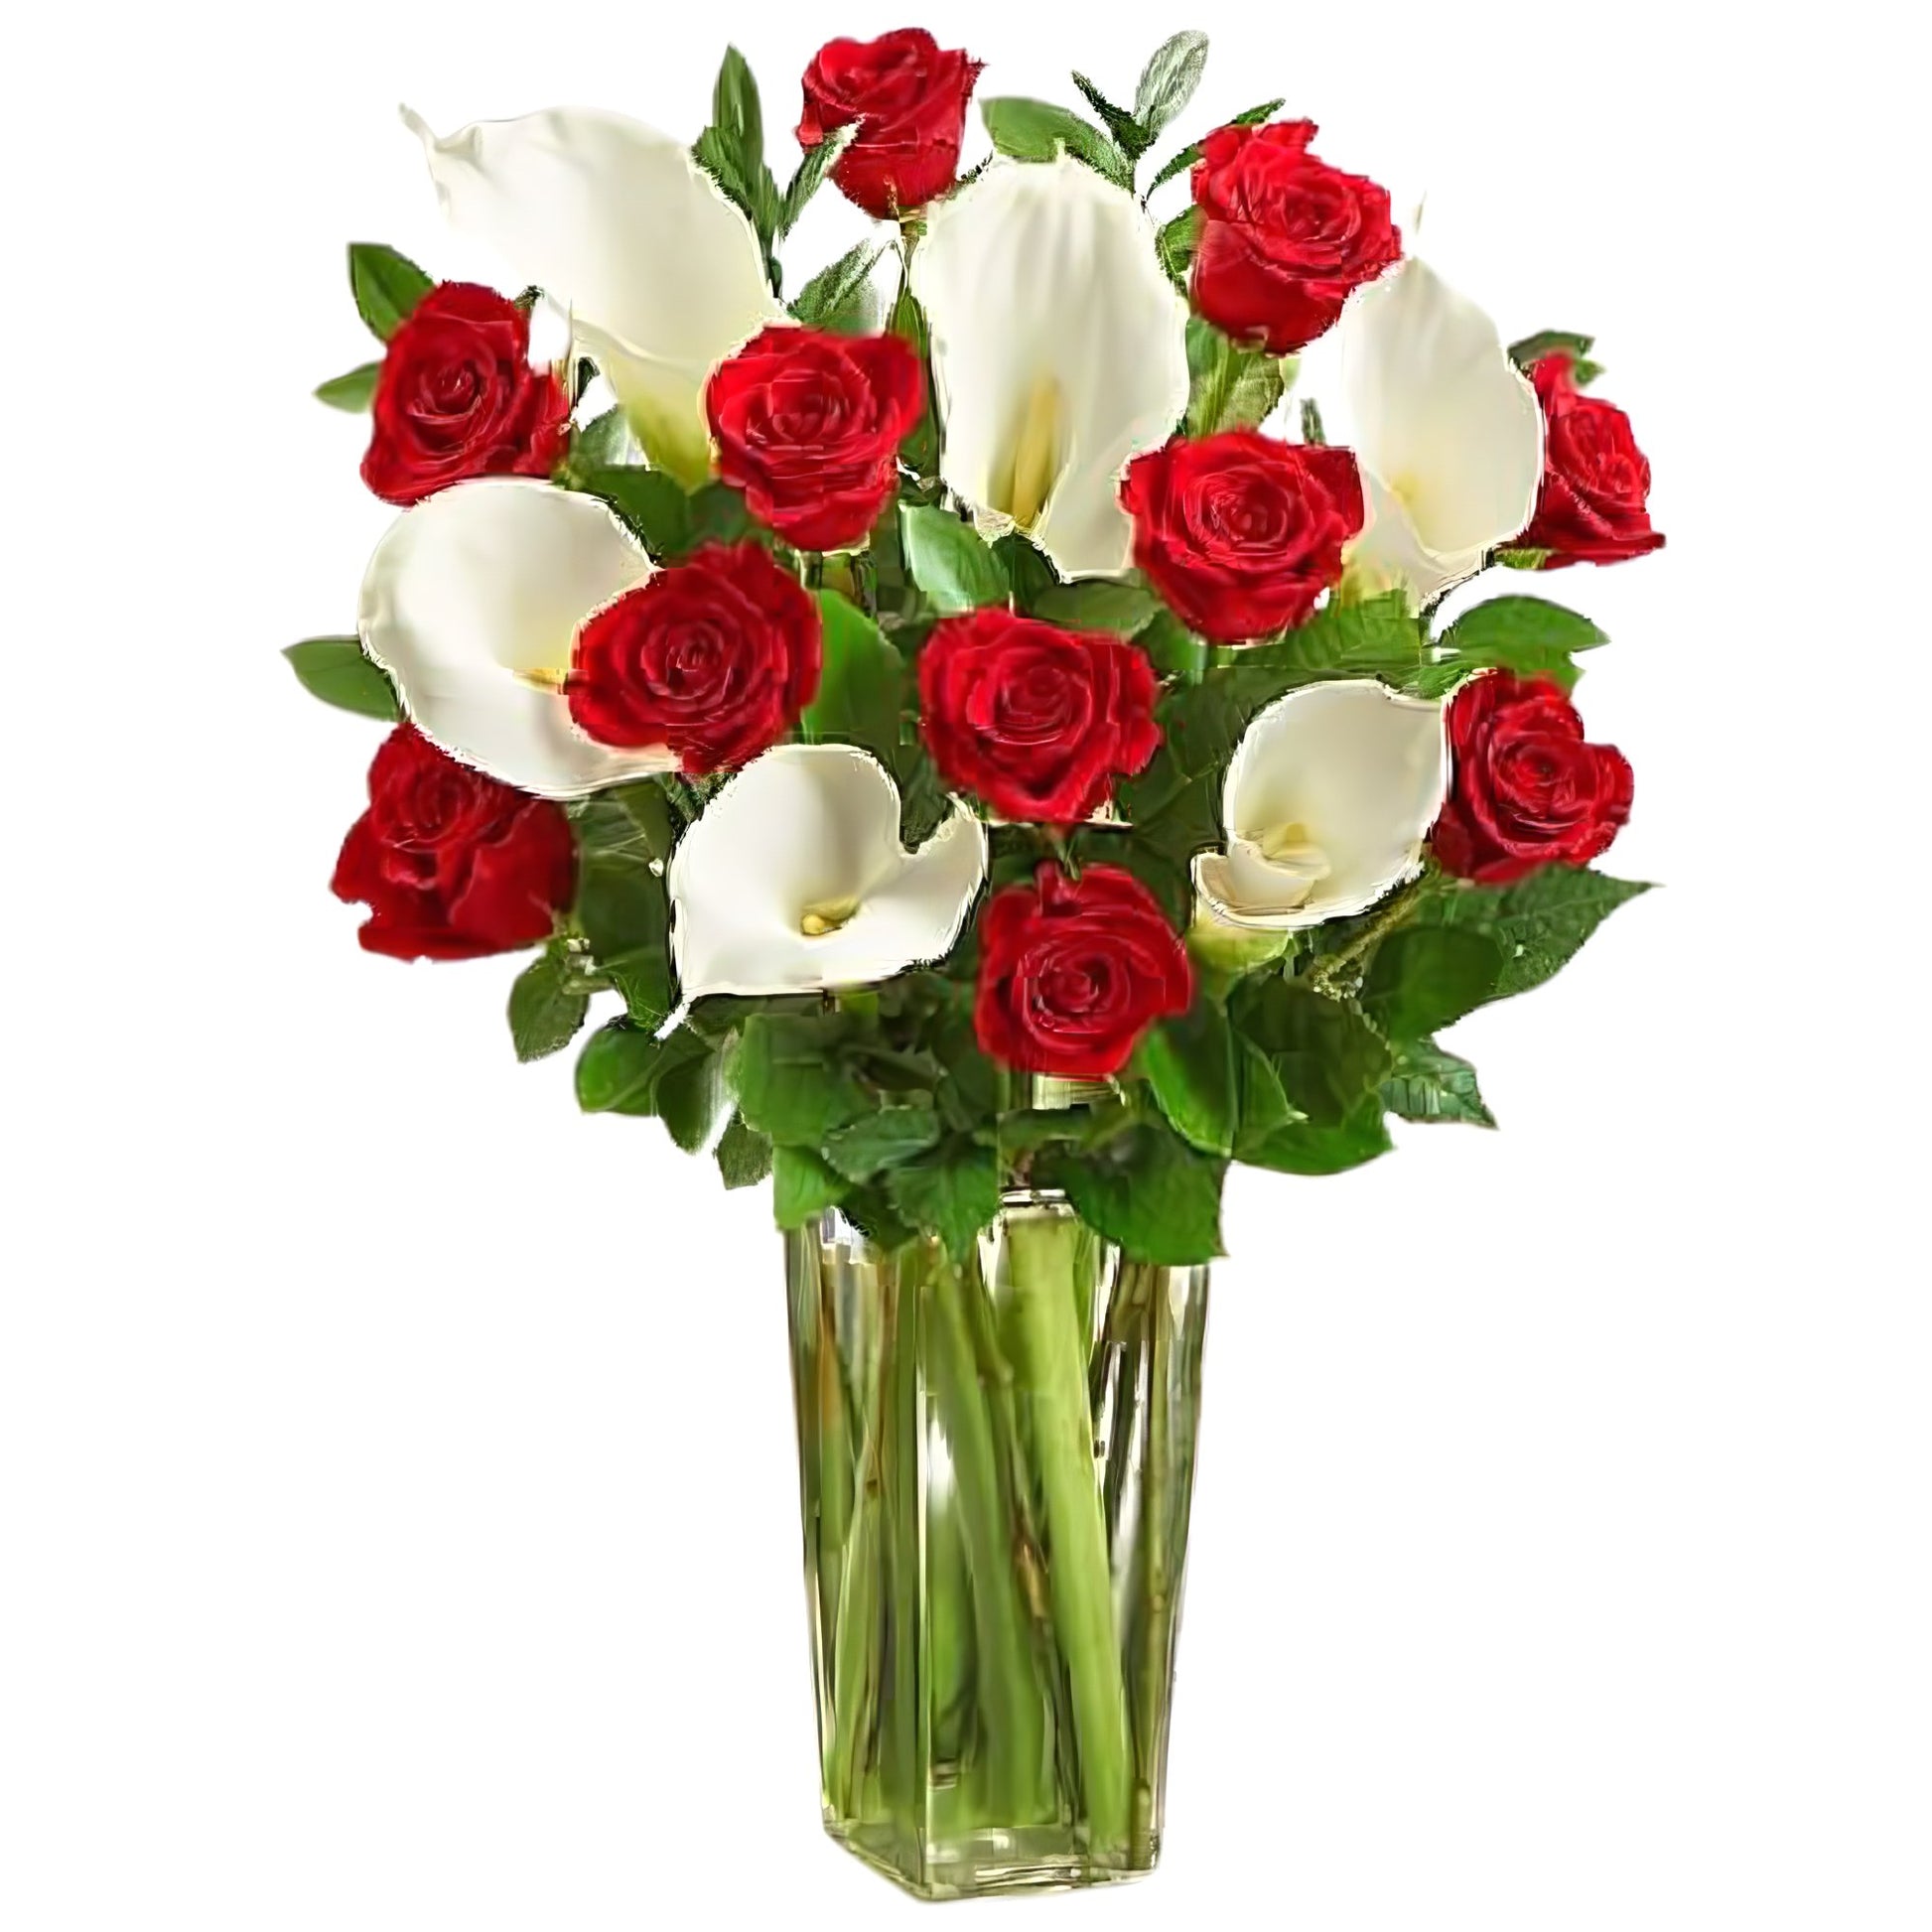 Red Rose & Calla Lily Bouquet - Floral Arrangement - Flower Delivery Brooklyn